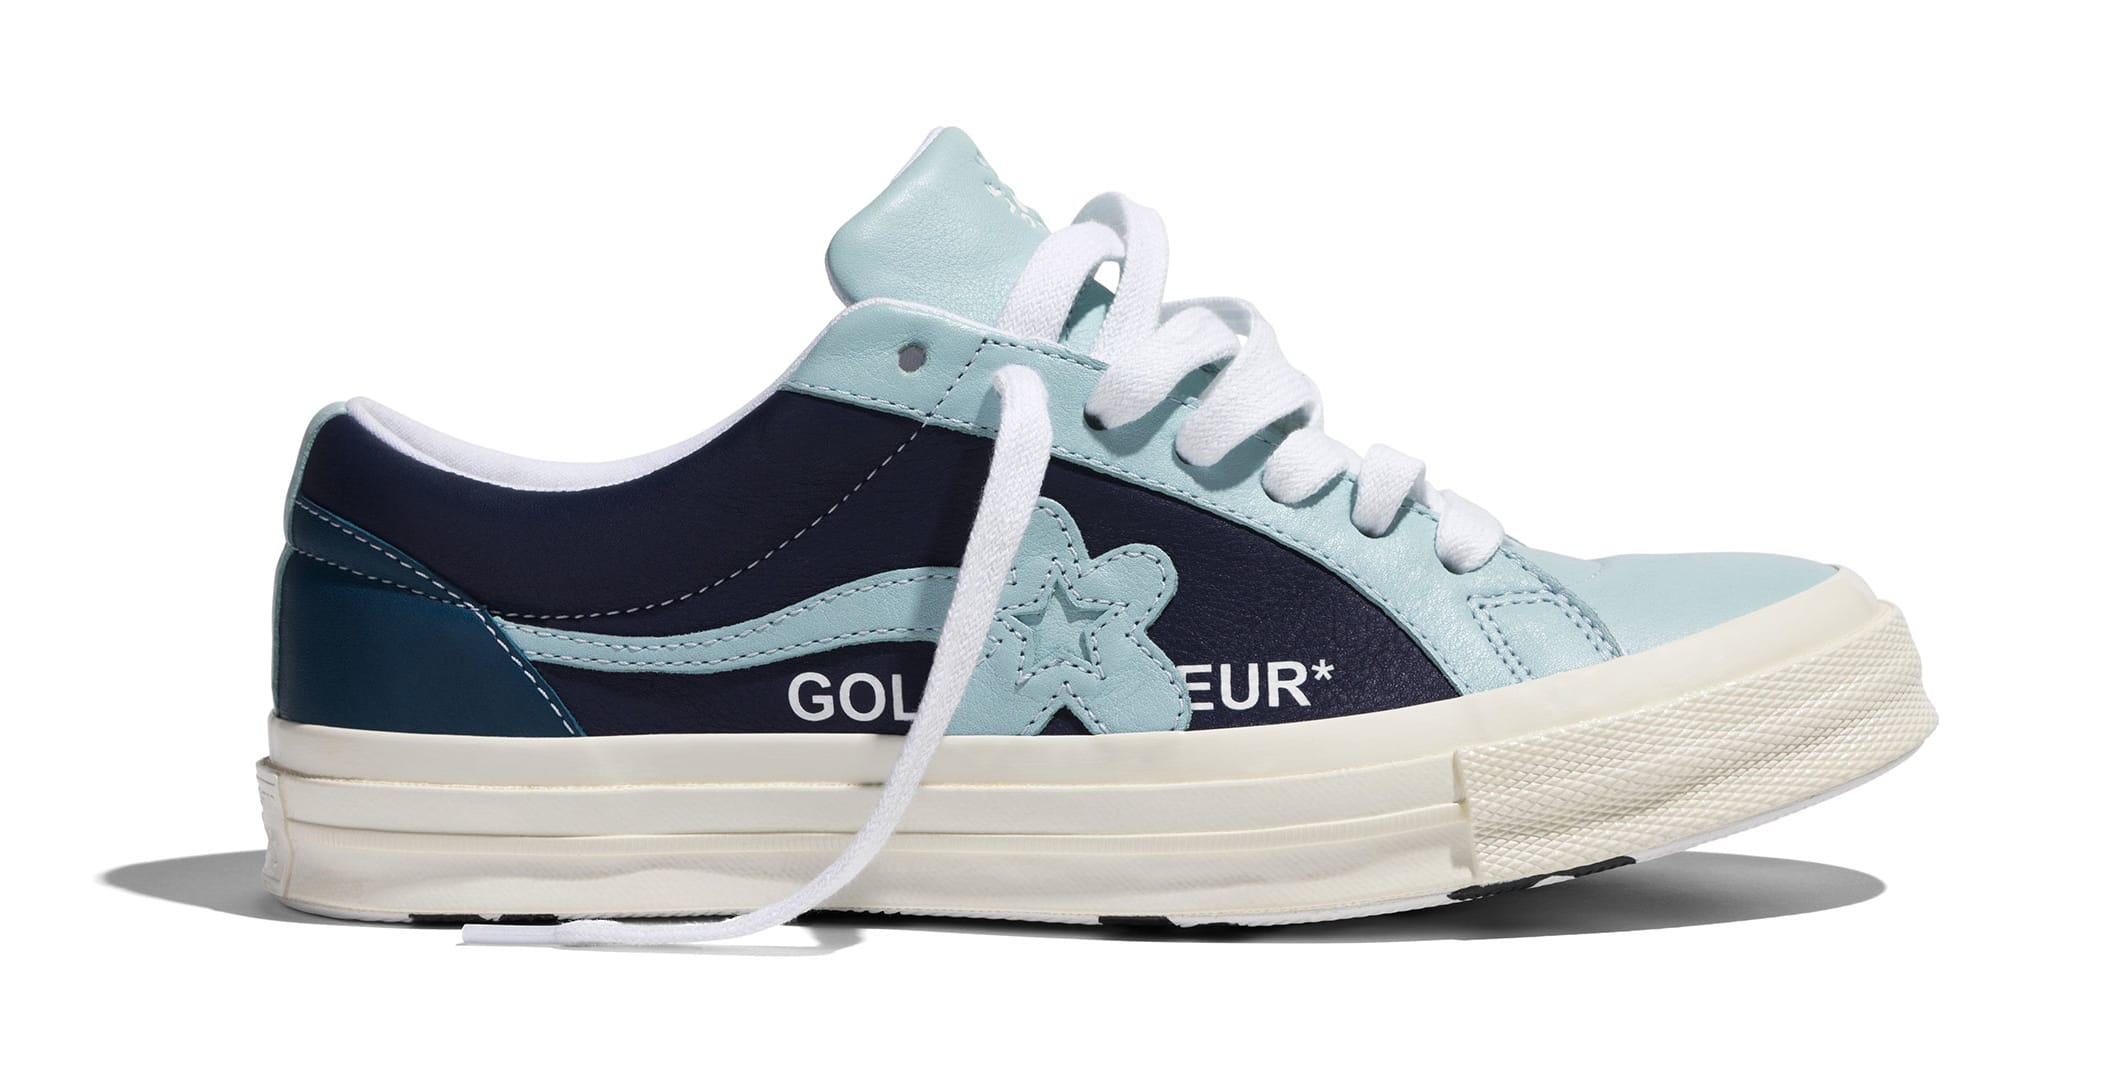 Tyler, the Creator x Converse Golf Le Fleur &#x27;Industrial Pack&#x27; 164024 (Lateral)